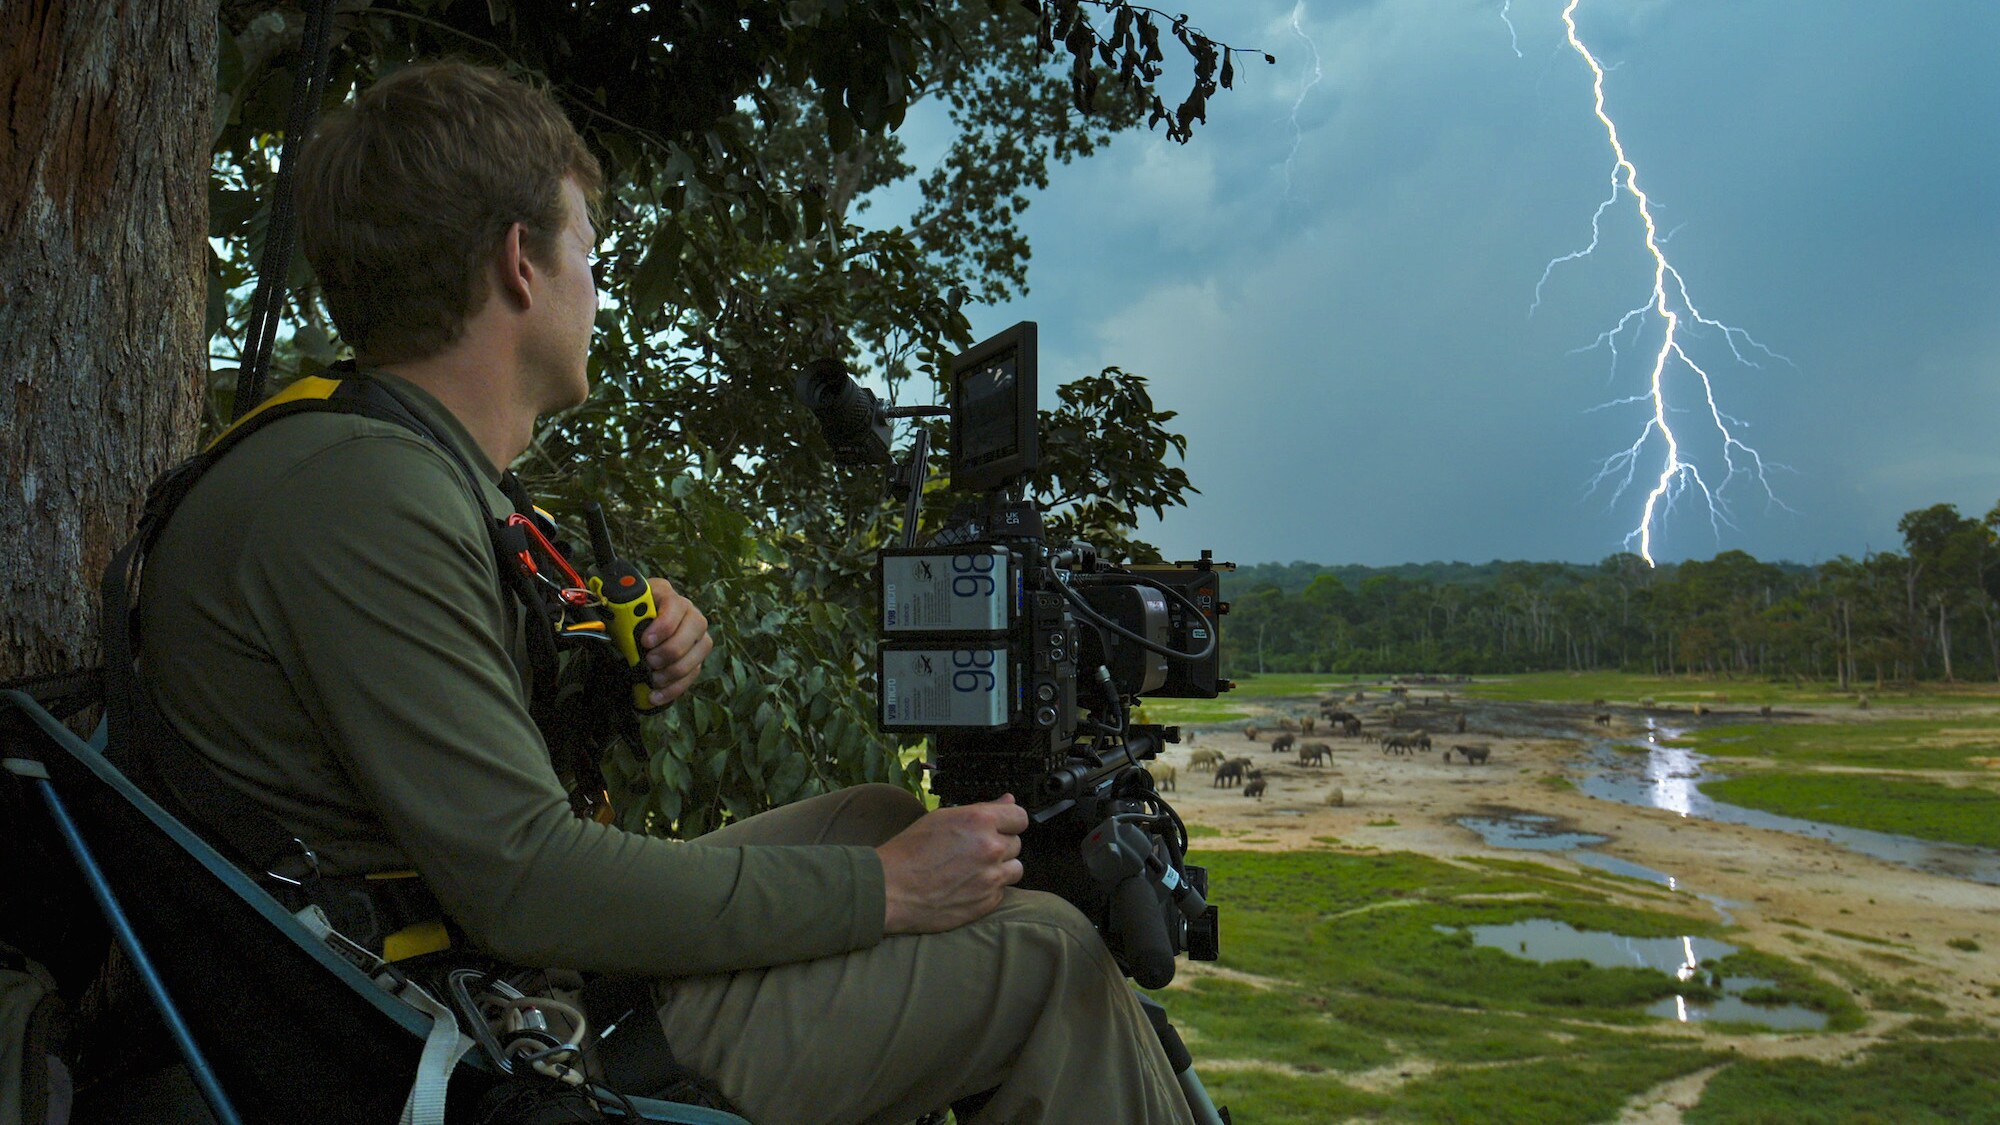 Bertie Gregory sitting up a tree watching the electrical storm. (National Geographic for Disney+/Mark Mclean)